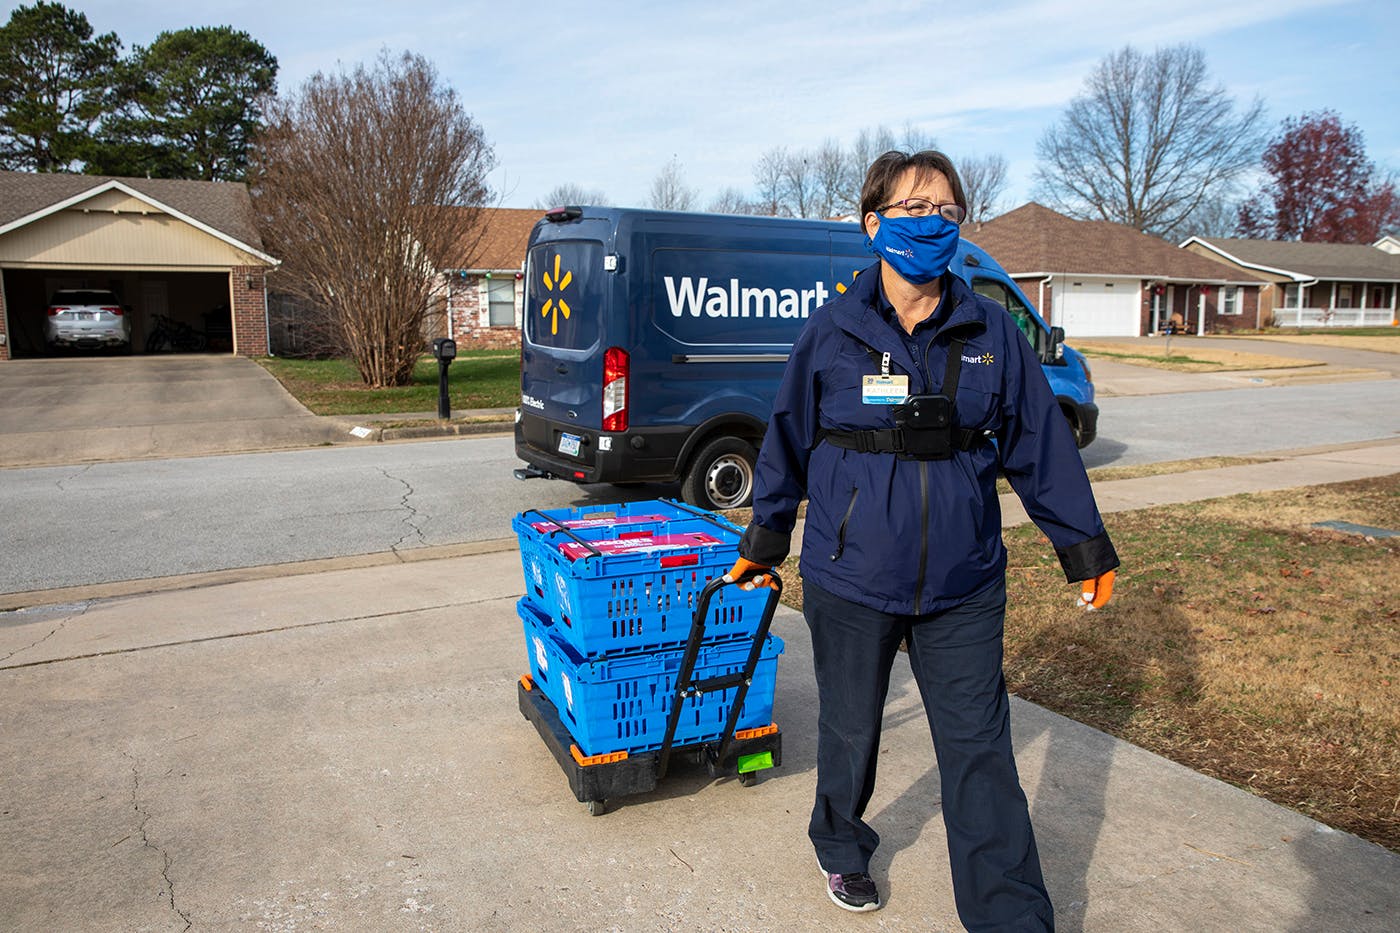 A Walmart employee walking up a house with a cart filled with groceries.